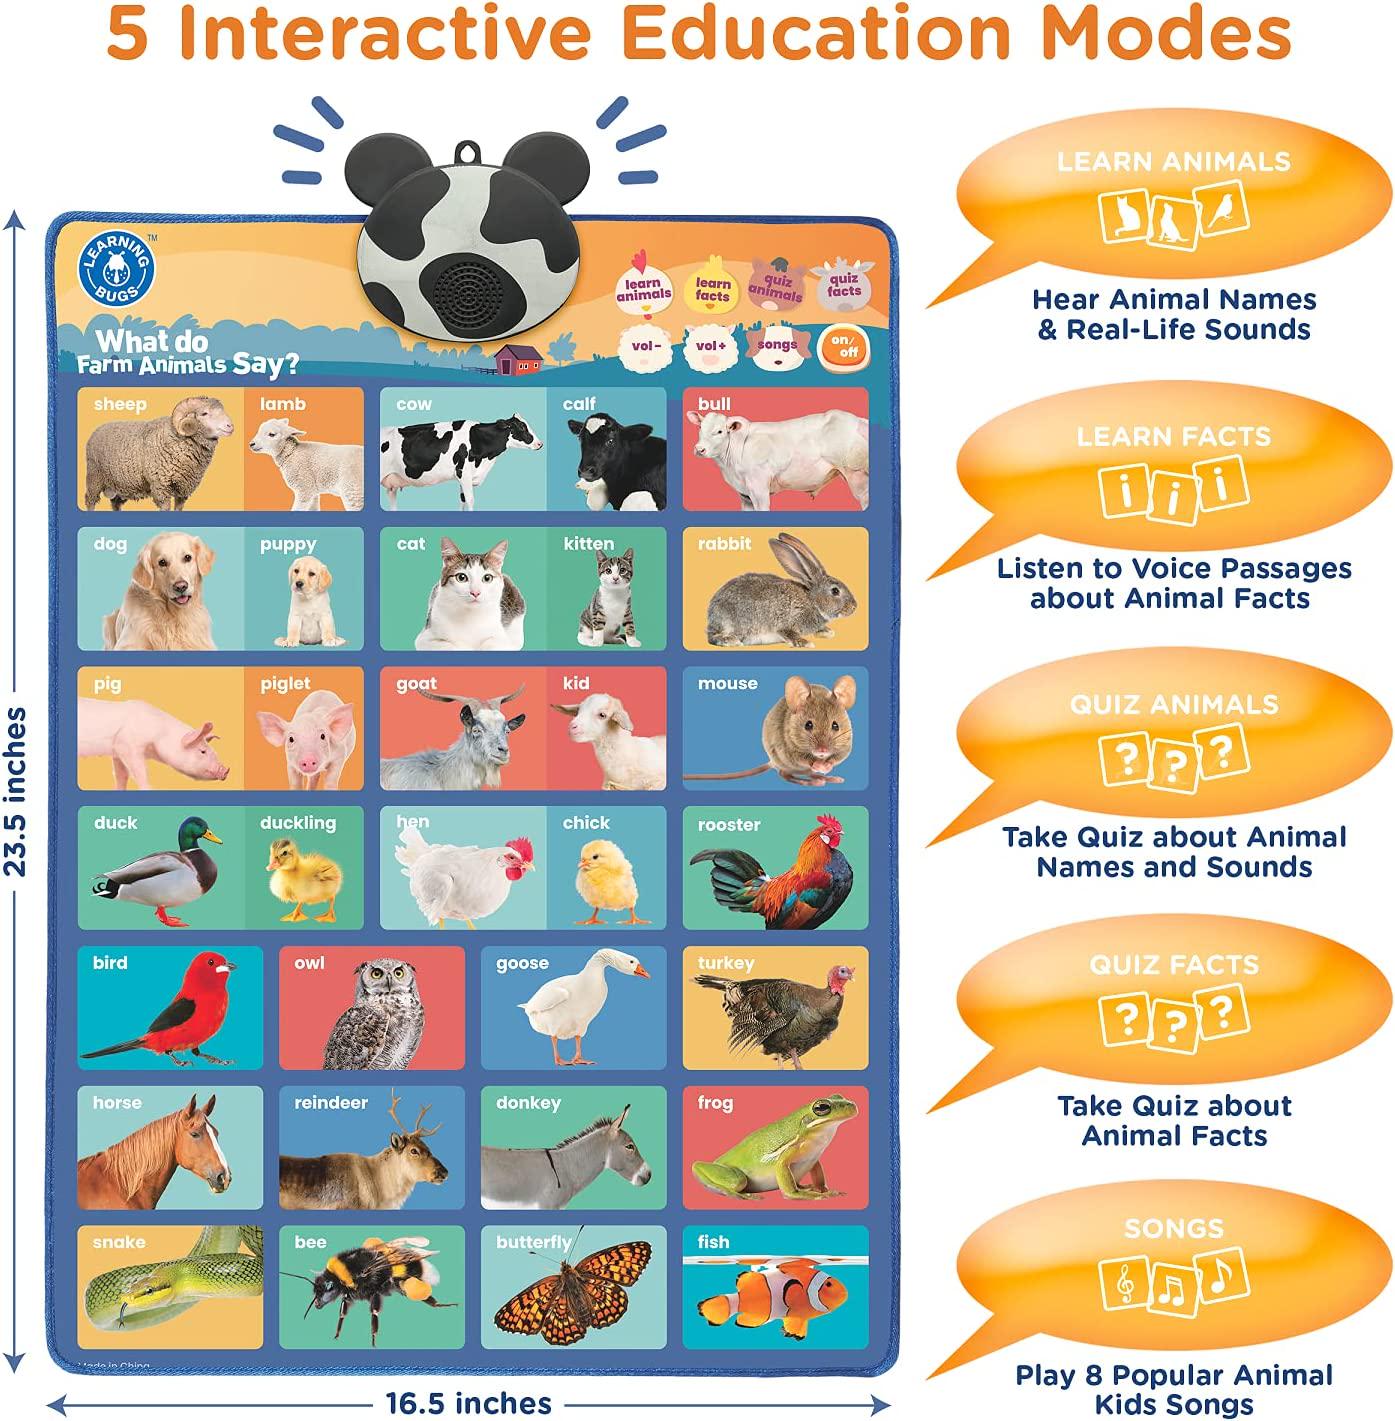 LEARNING BUGS, LEARNING BUGS What do Farm Animals Say, Interactive Educational Farm Animals Poster, Hear 32 Farm Animals Name, Real-Life Sound and Child Friendly Facts for Young Learners Aged 1 to 5 Years Old